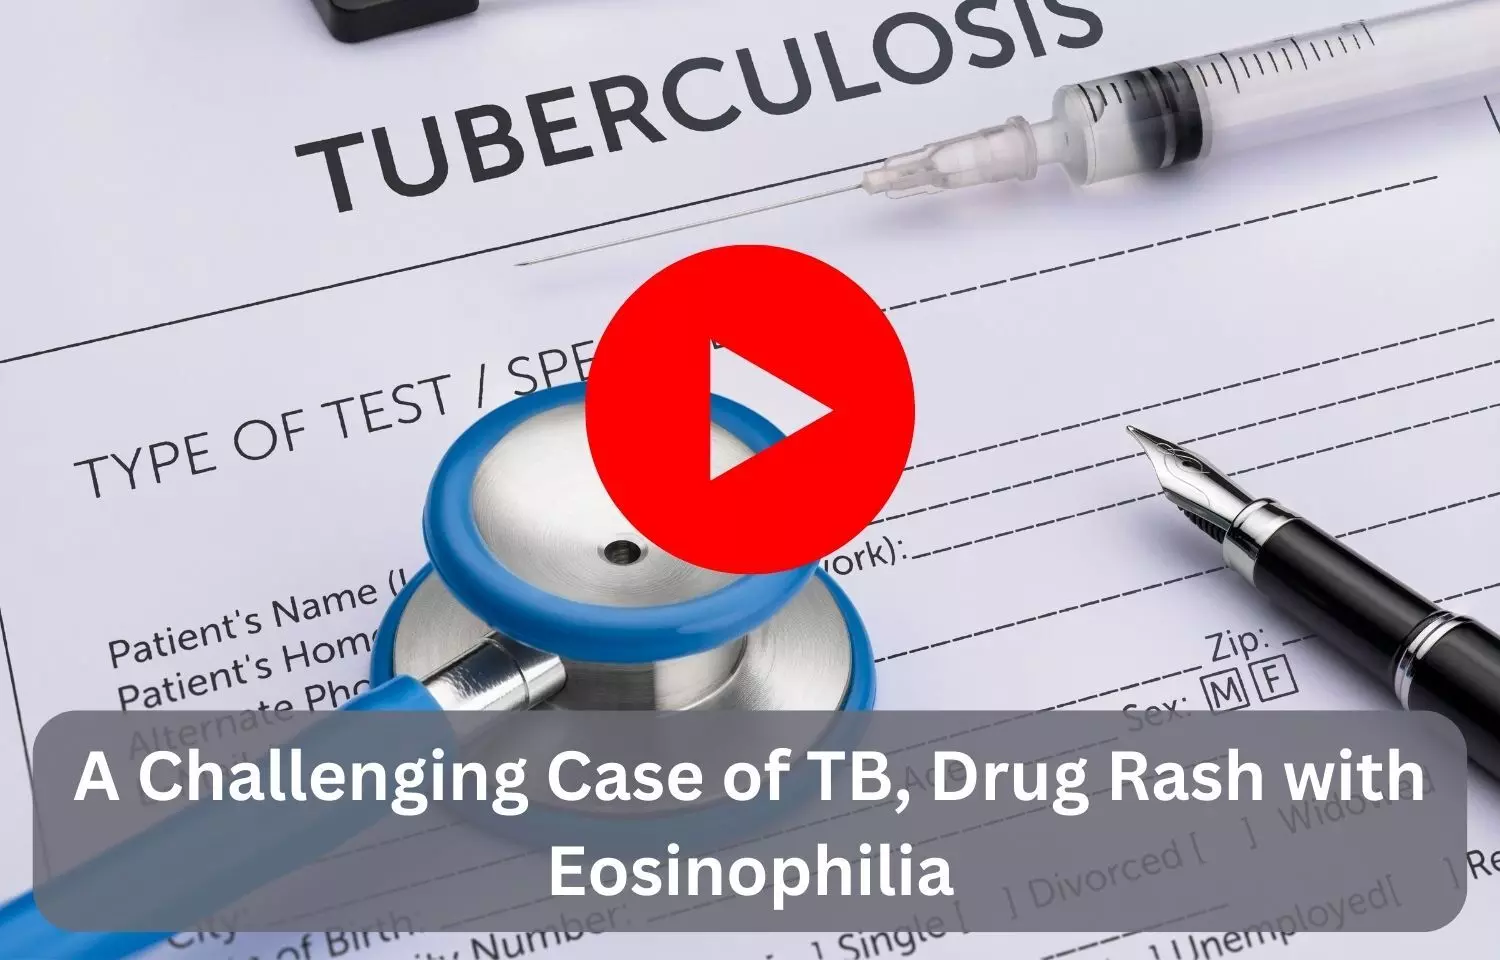 A Challenging Case of TB, Drug Rash with Eosinophilia